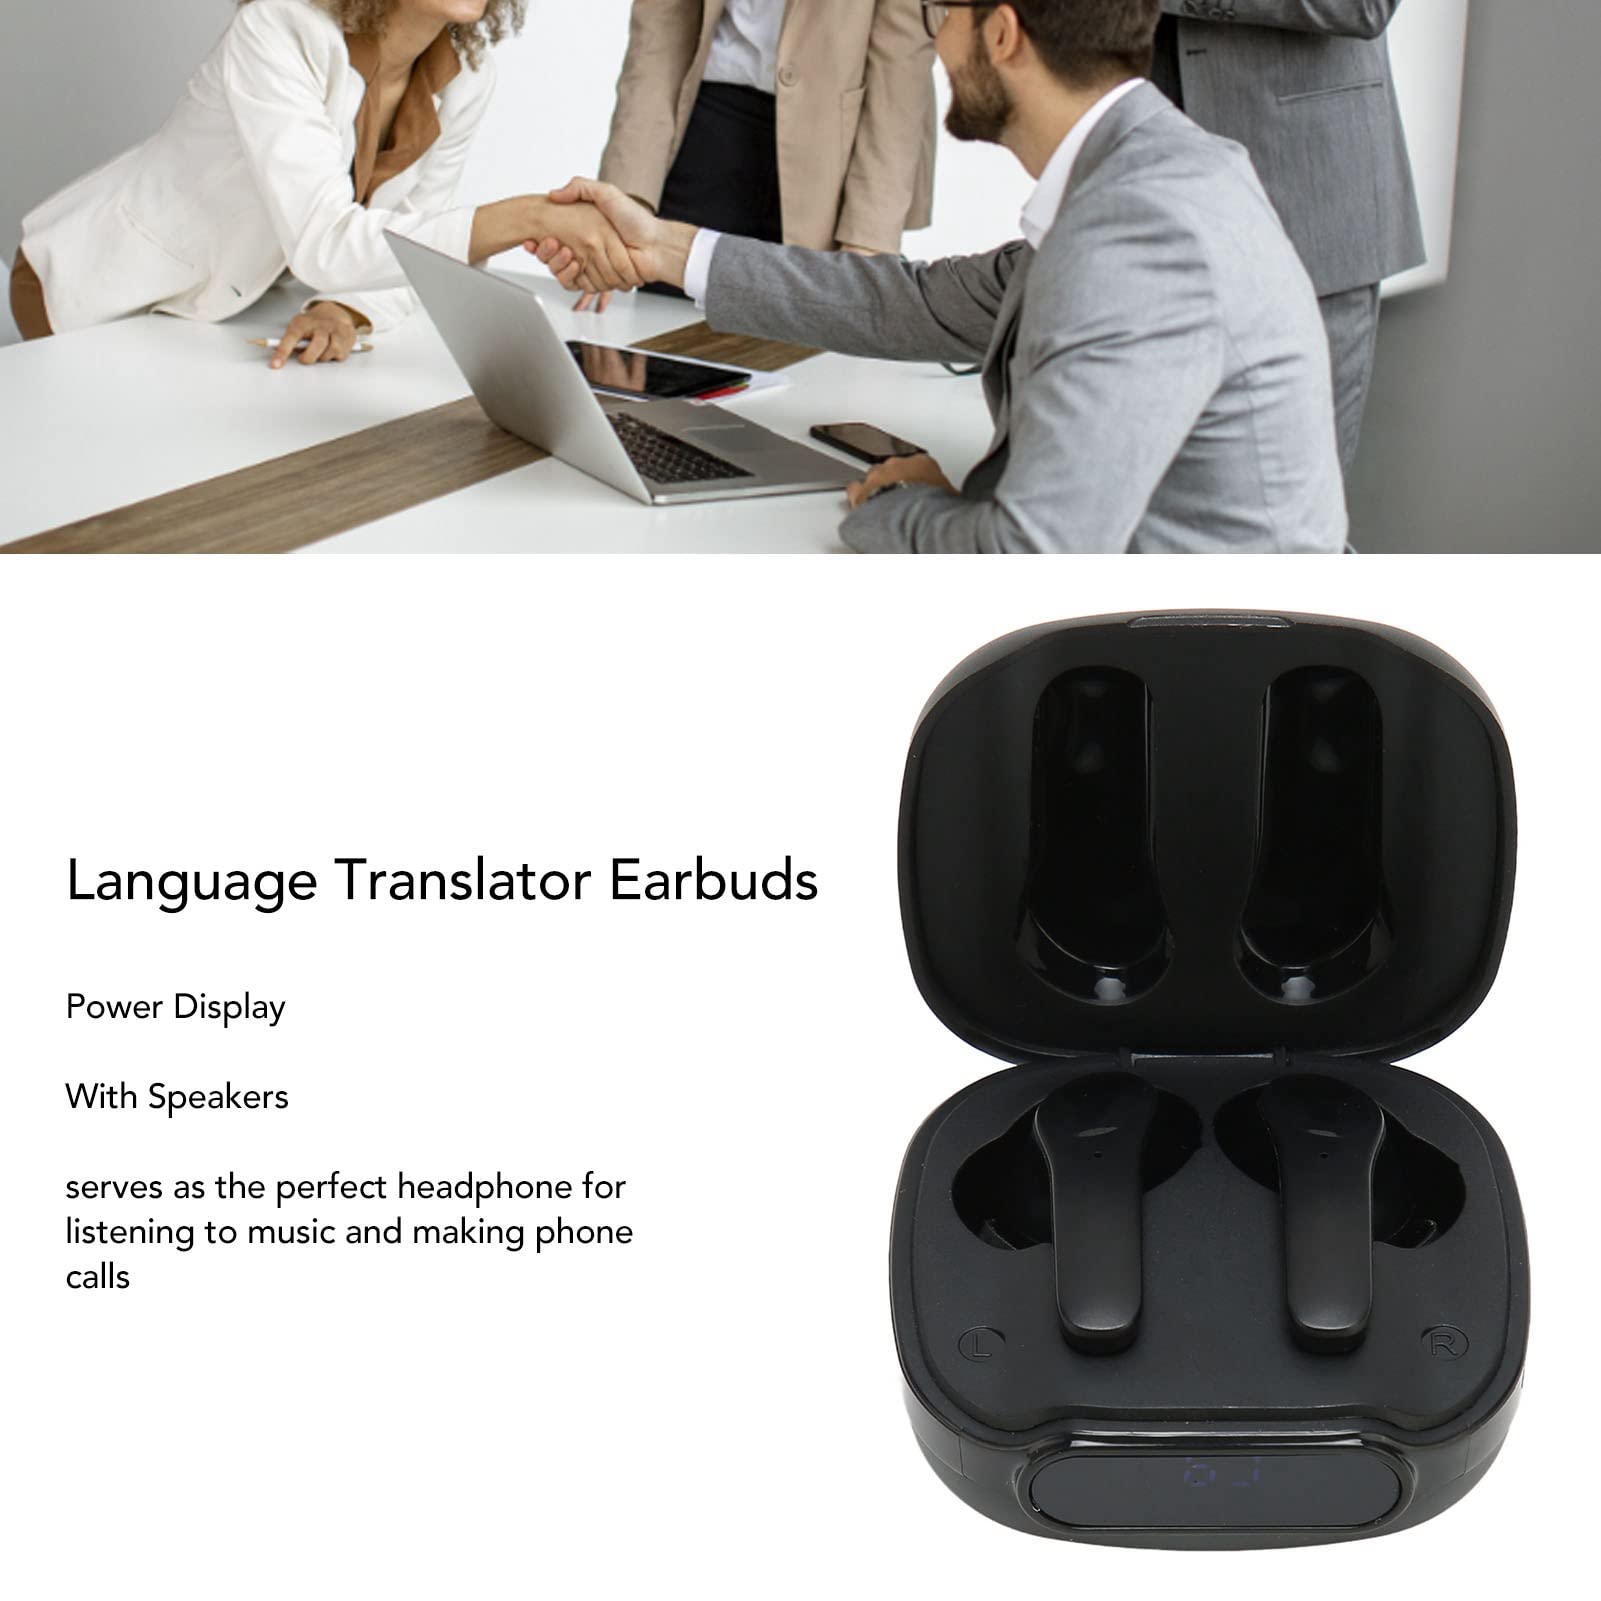 Language Translator Earbuds, Wireless Bluetooth Translator Earbuds 84 Languages Smart Voice Translator Earbuds with Speakers Two Way High Accuracy Noise Reduction Translator Device (Black)